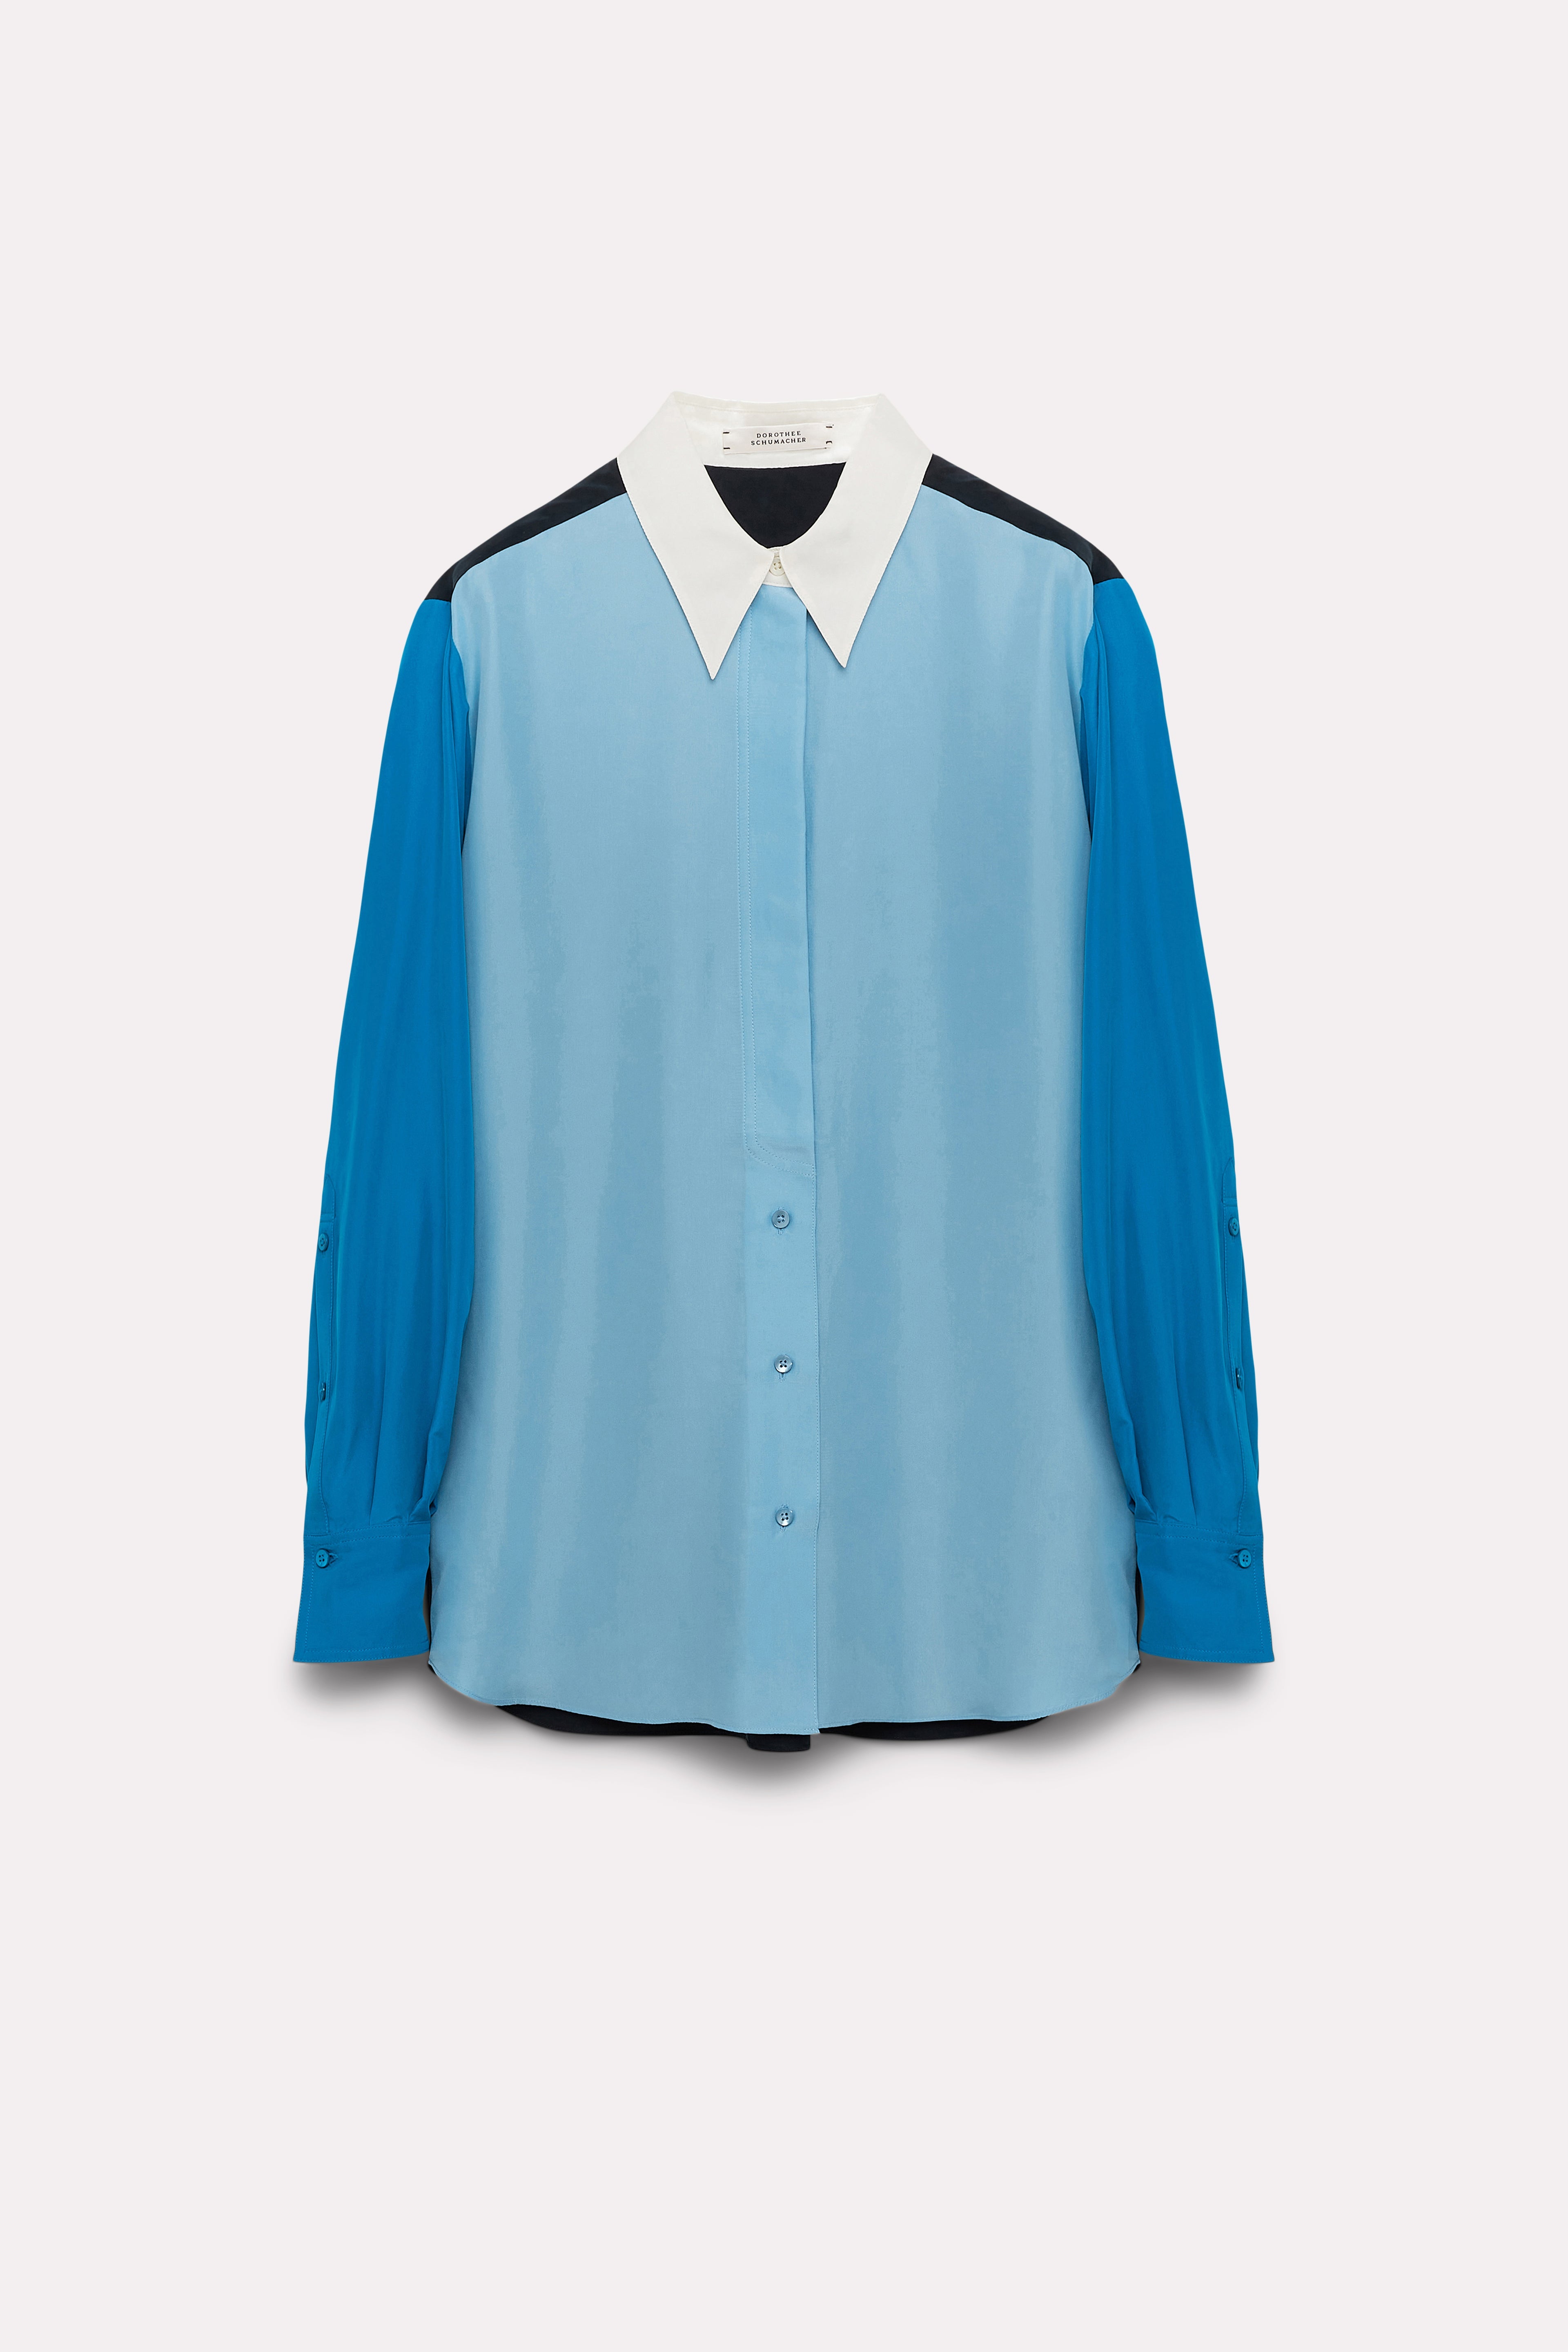 Dorothee-Schumacher-OUTLET-SALE-HERITAGE-EASE-blouse-Blusen-ARCHIVE-COLLECTION.jpg